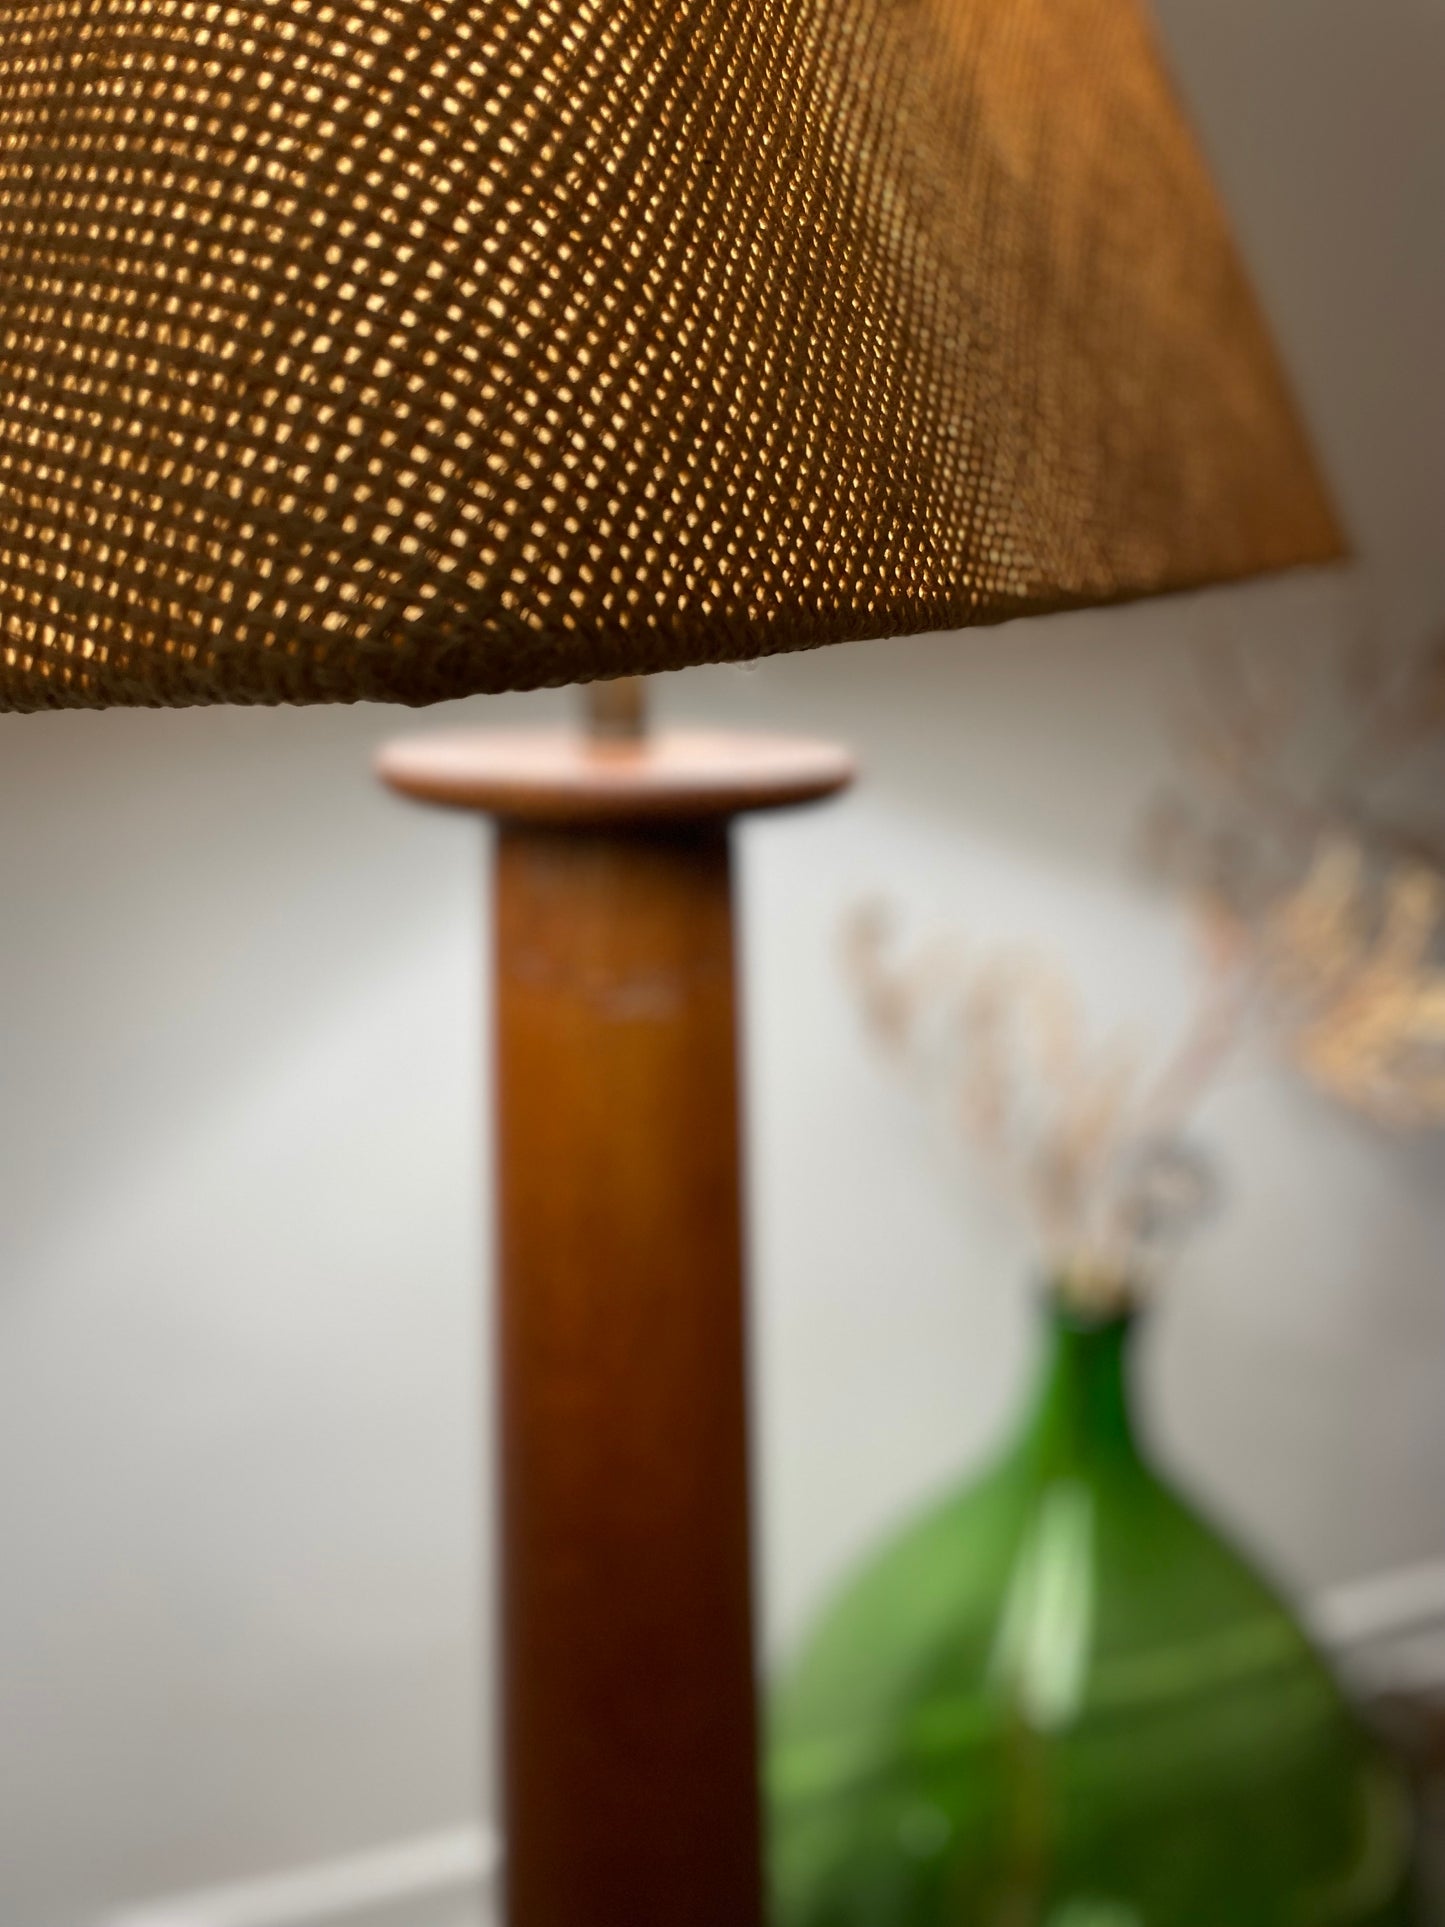 - Pacific Green Floor Lamp with Textured Hessian Shade